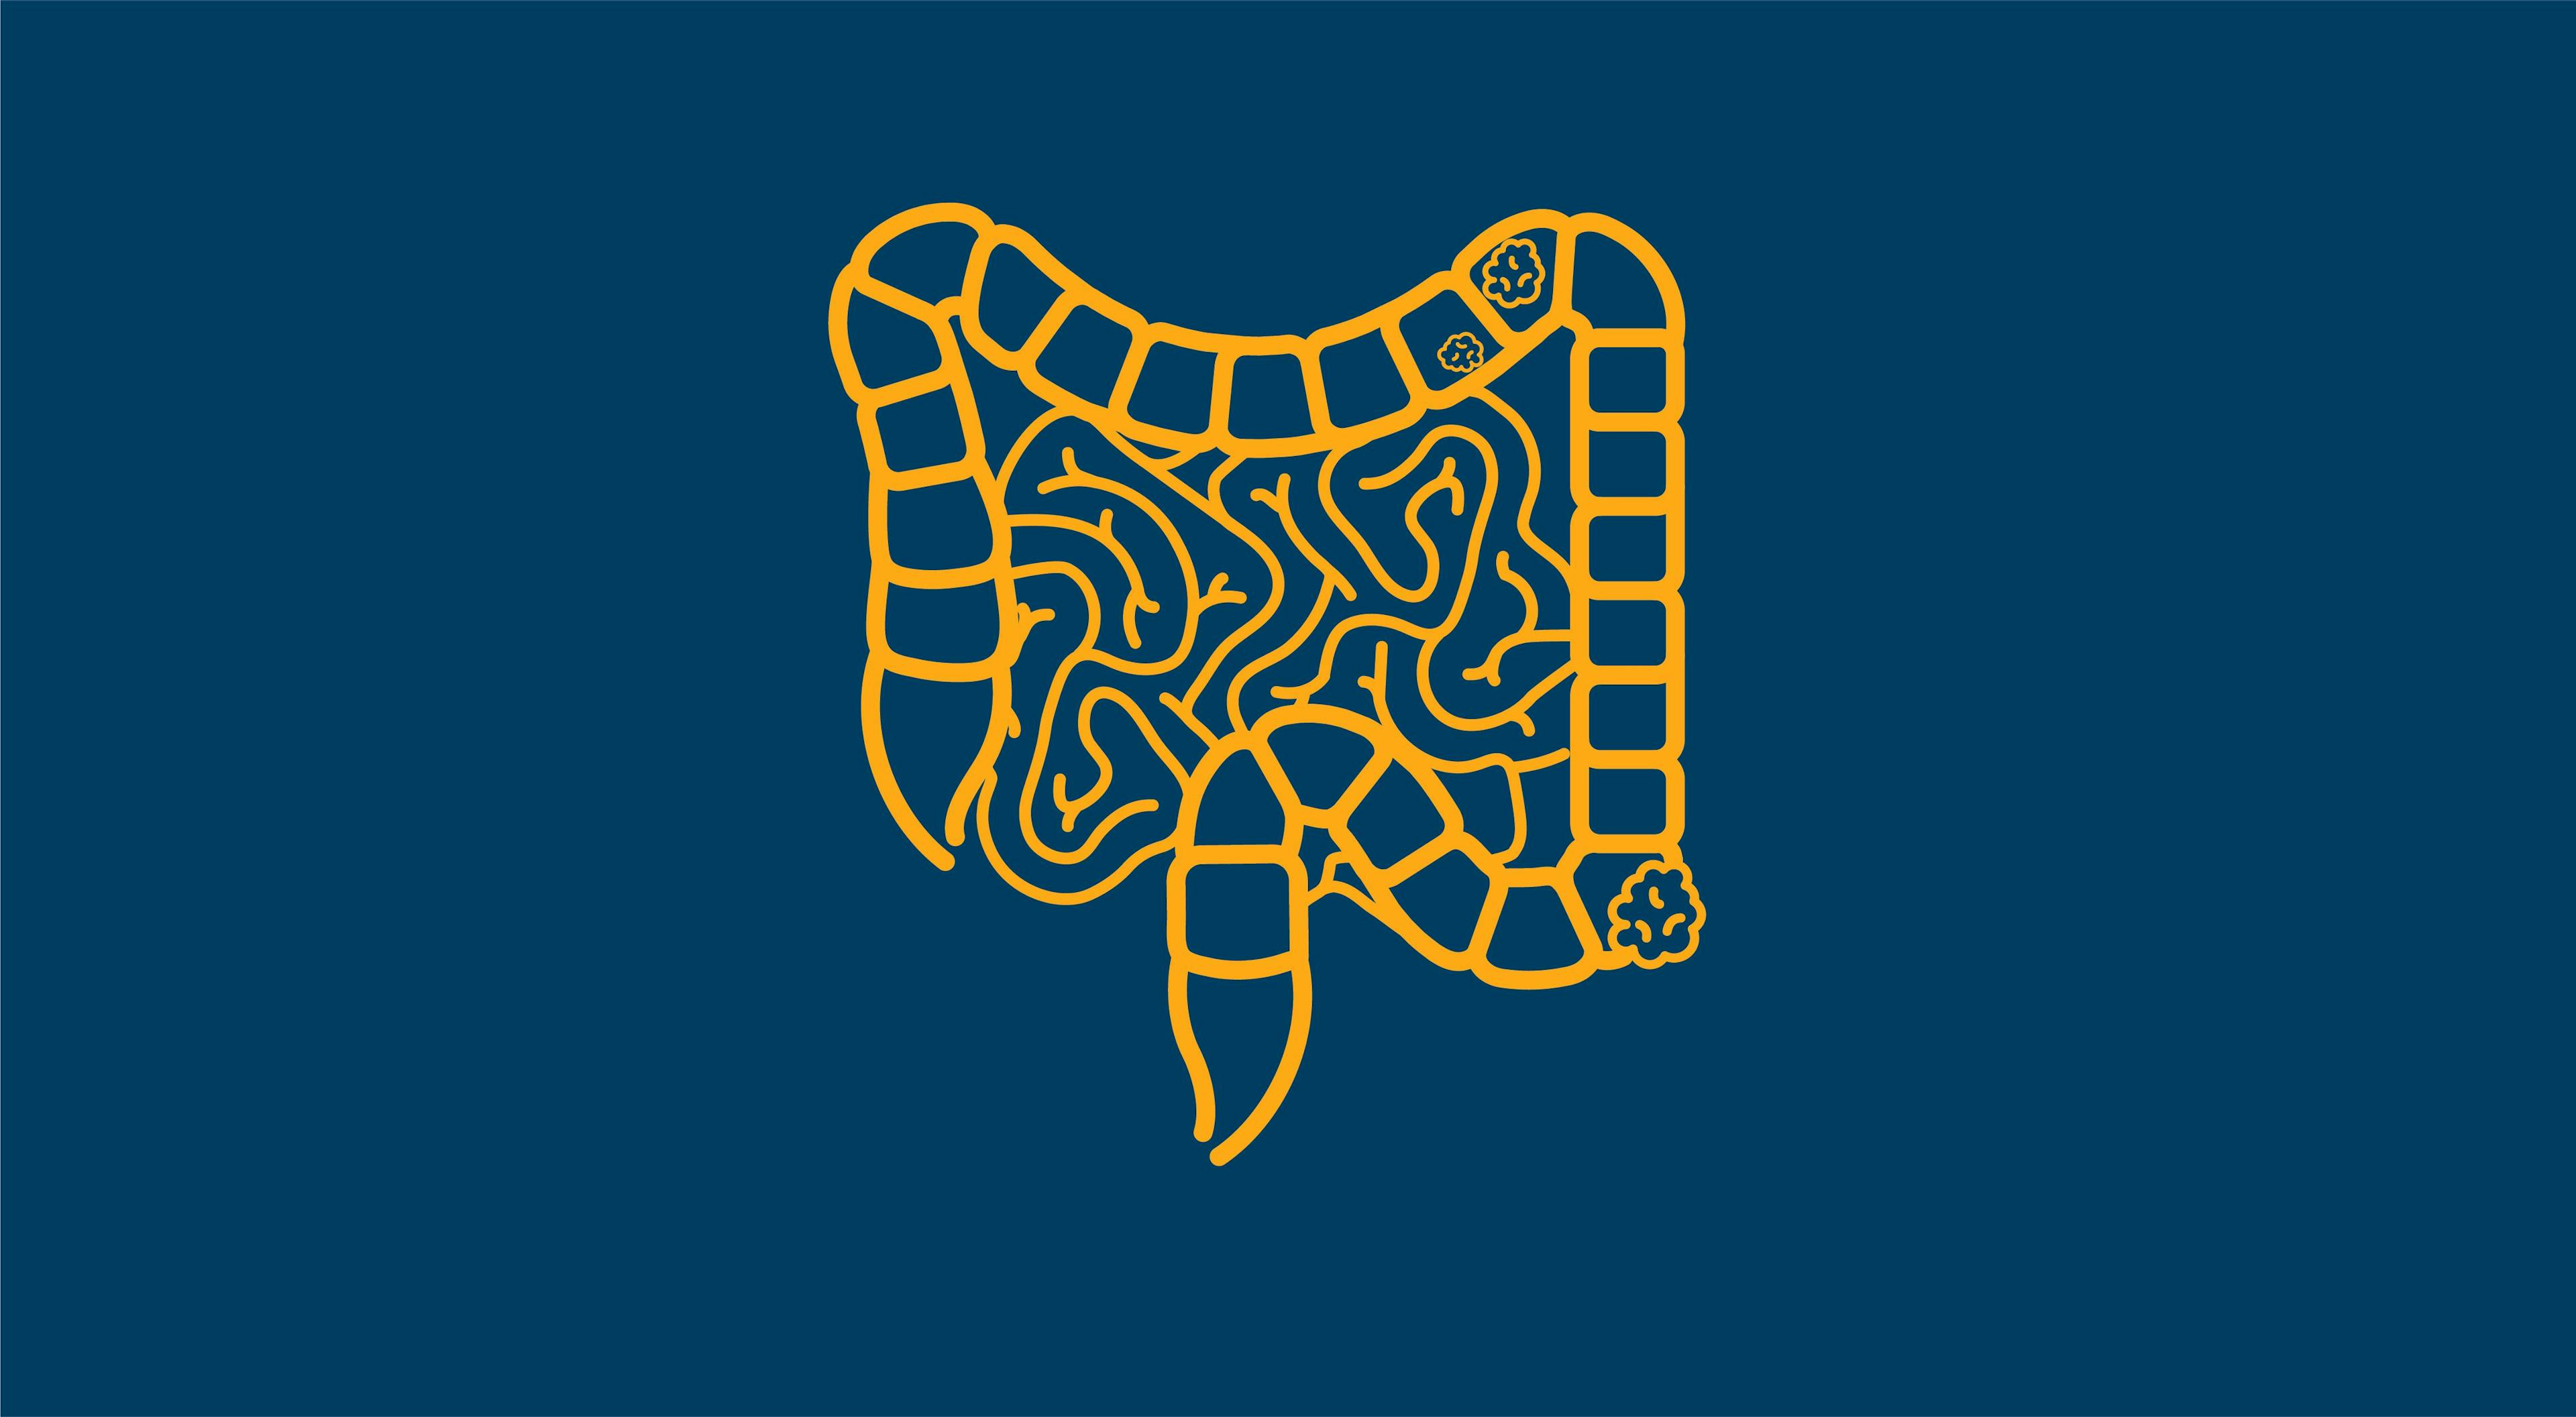 Data from the phase 2 MOUNTAINEER trial showed durable responses with tucatinib plus trastuzumab for patients with previously treated metastatic HER2-positive colorectal cancer.